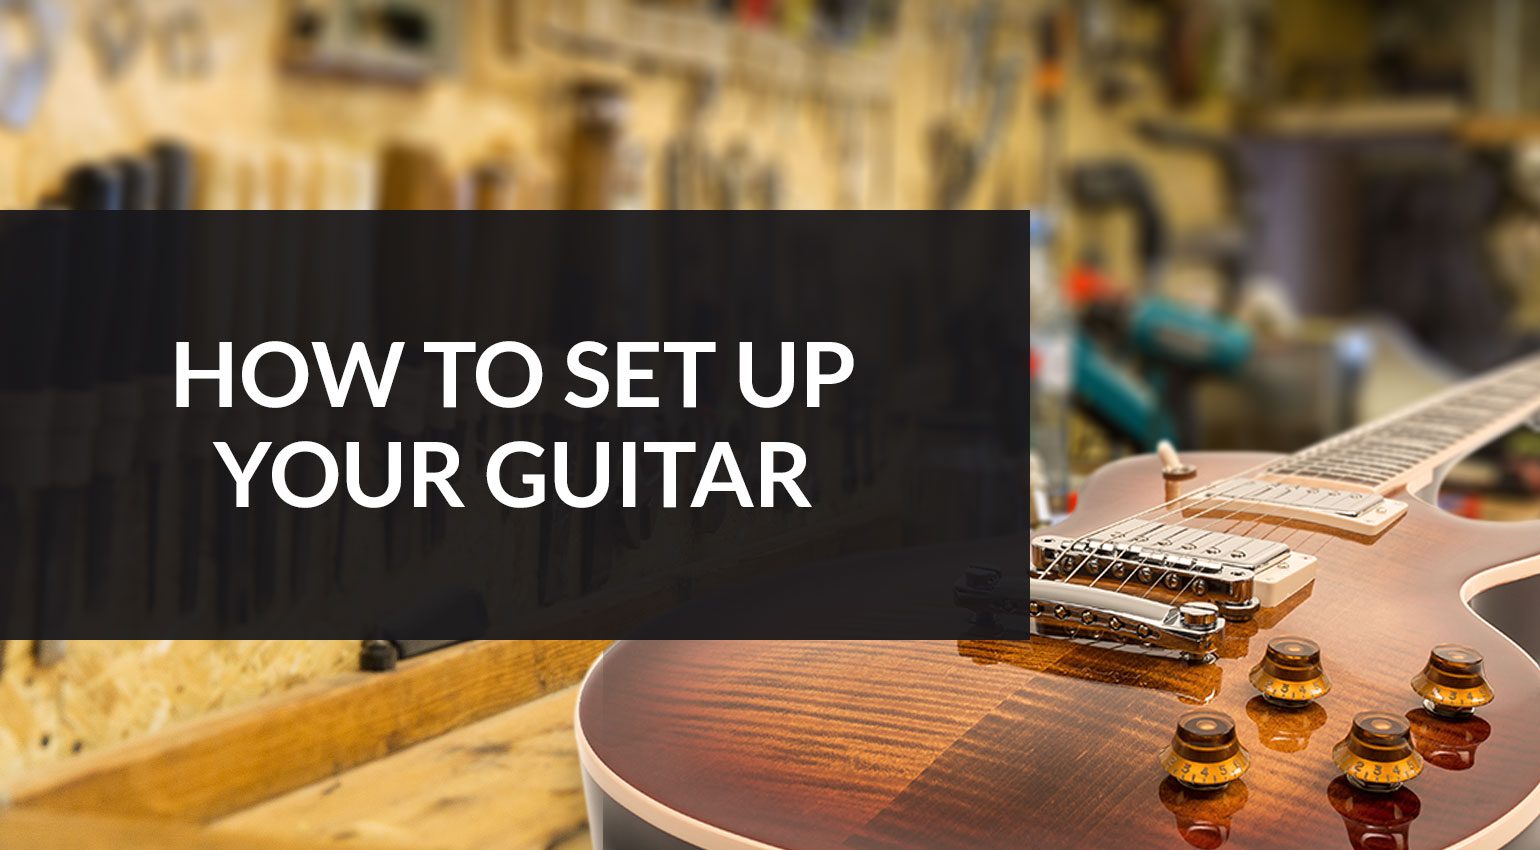 Advanced Guitar Setup with Fret Dress Included